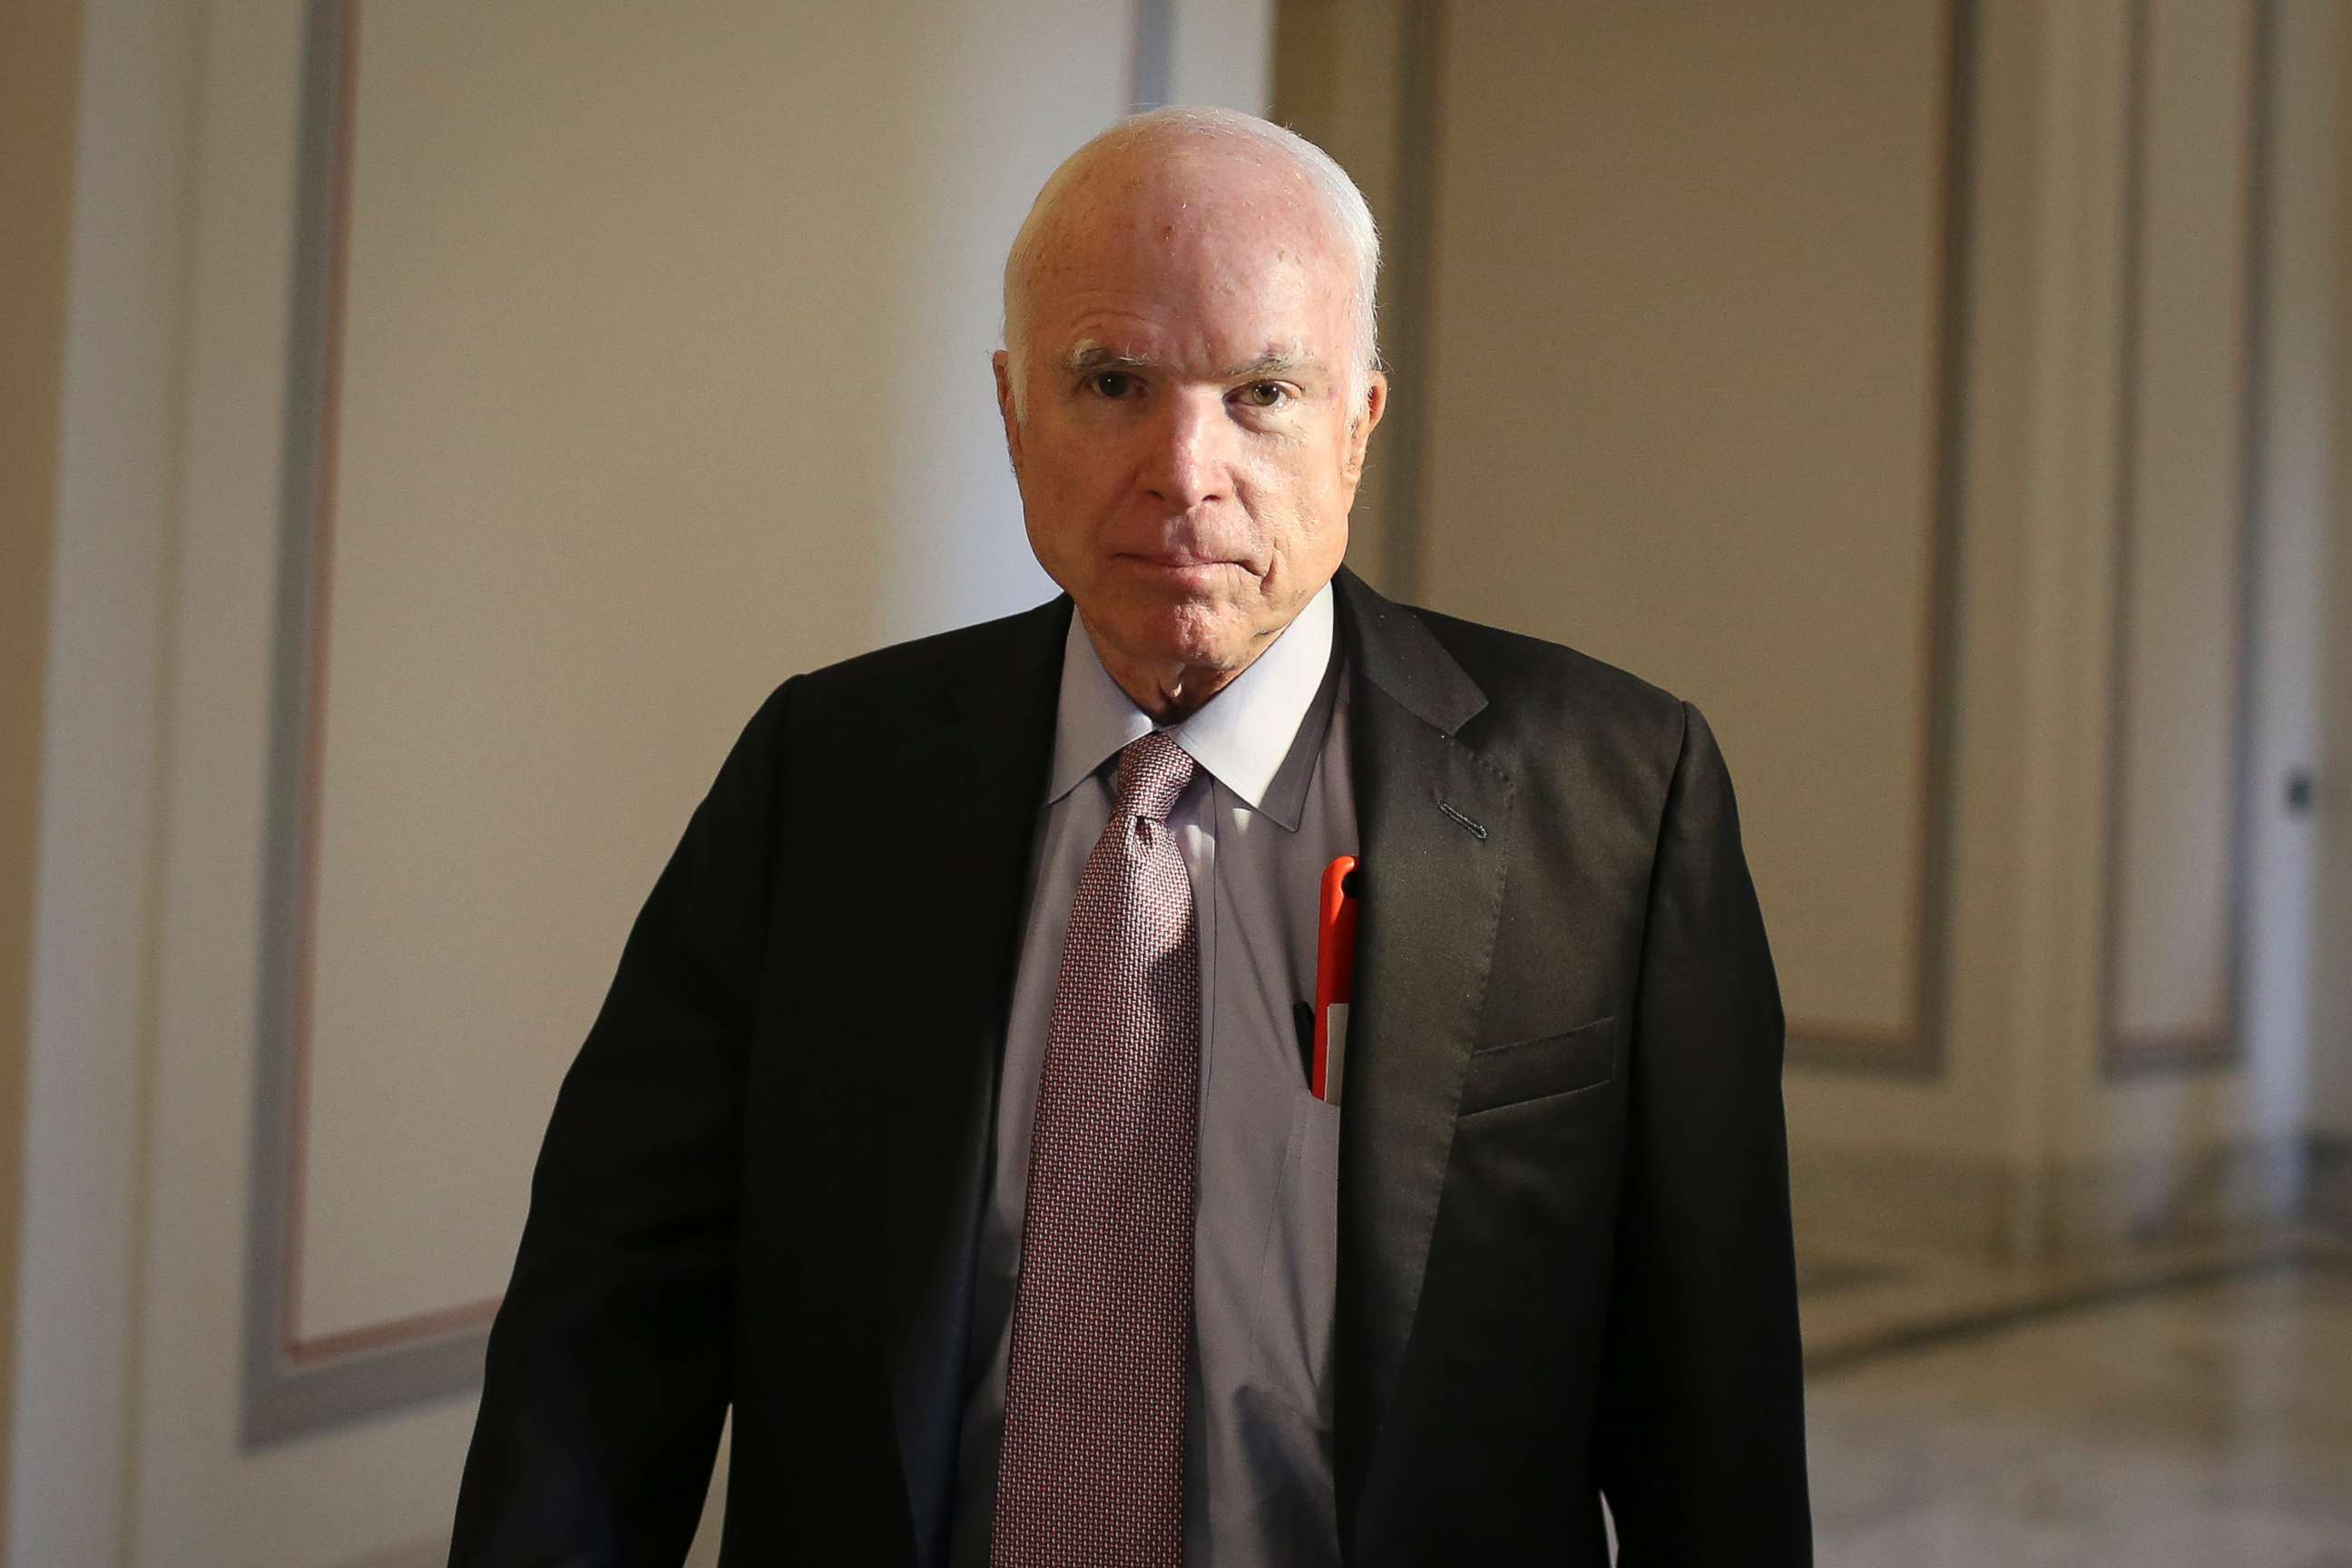 PHOTO: Sen. John McCain walks outside of his office in the Russell Senate Office Building on Sep. 5, 2017 in Washington, D.C.